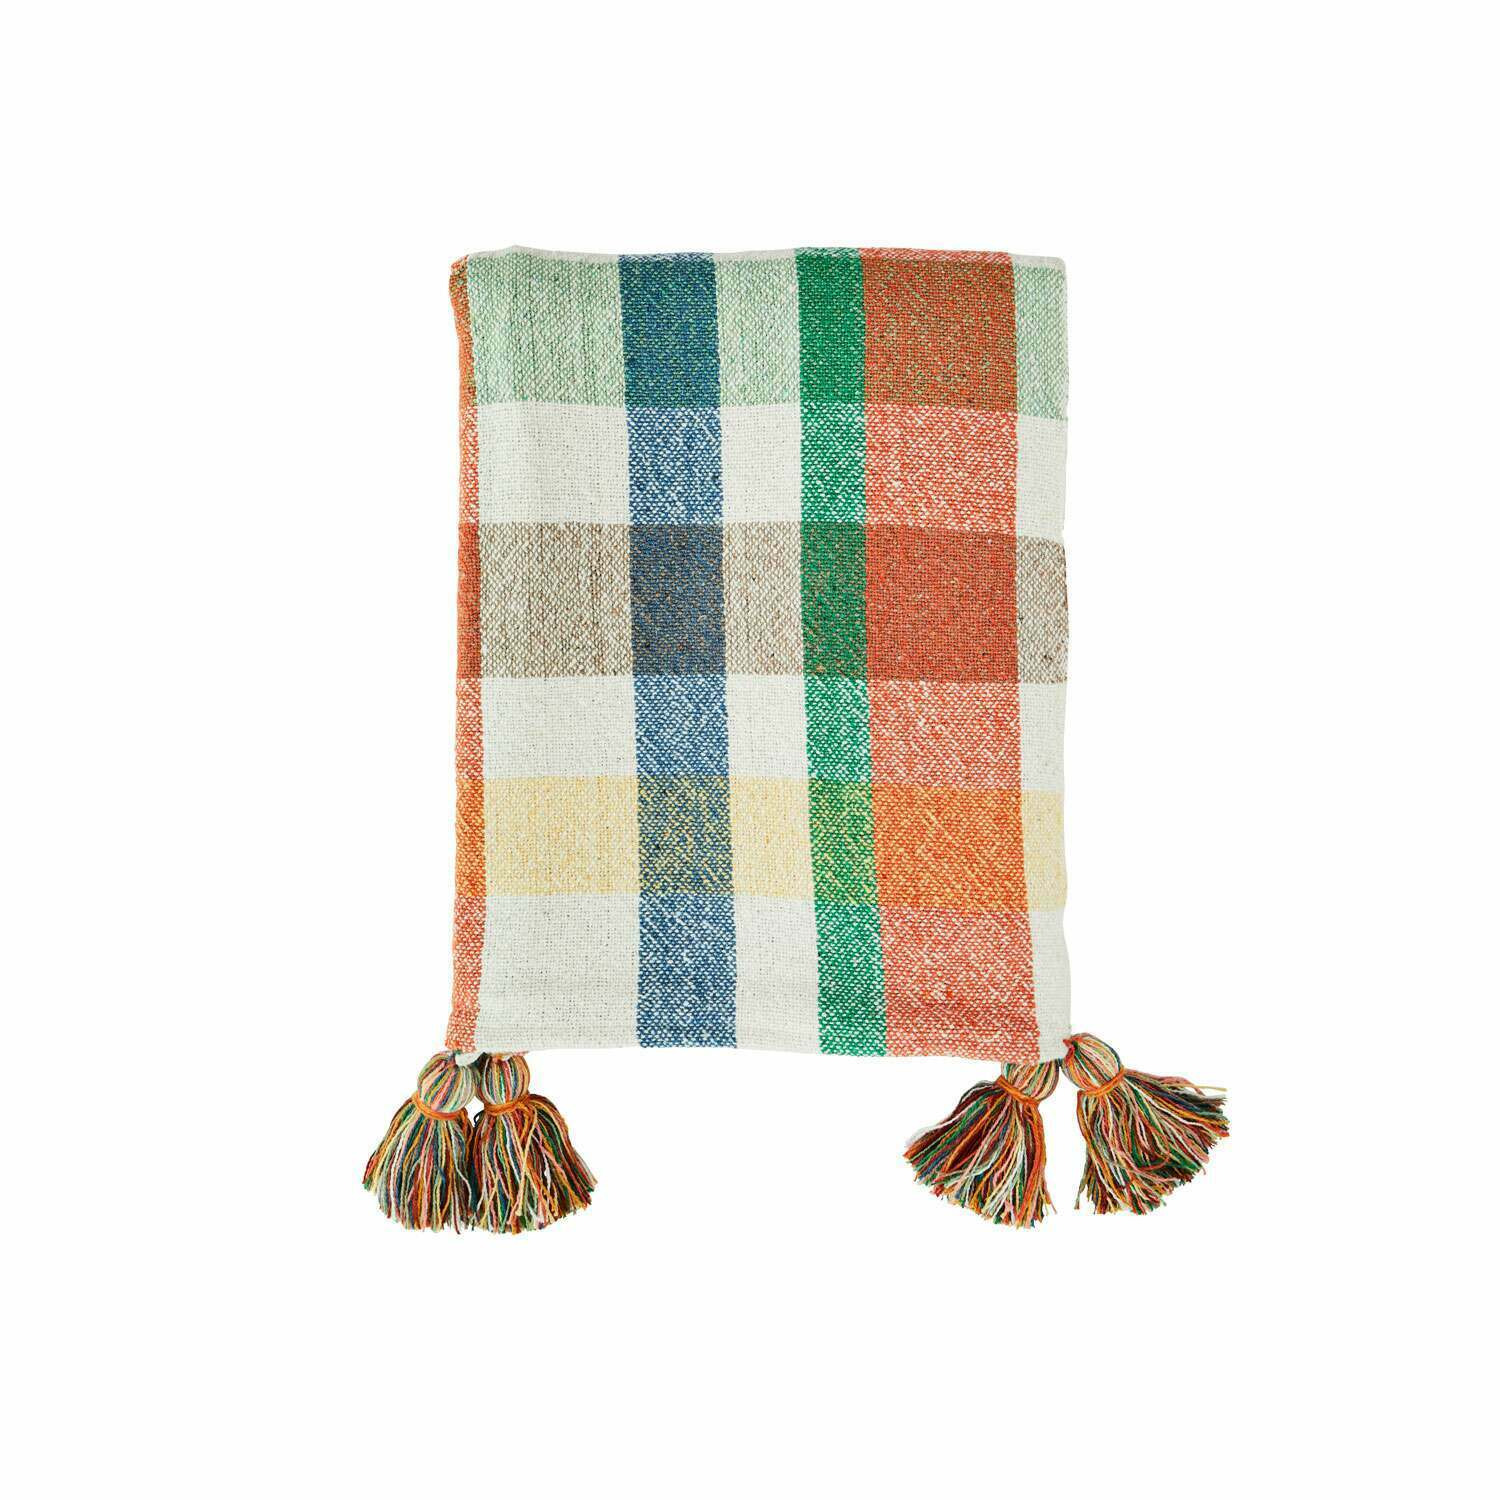 Graham and Green Orange Check Recycled Cotton Throw